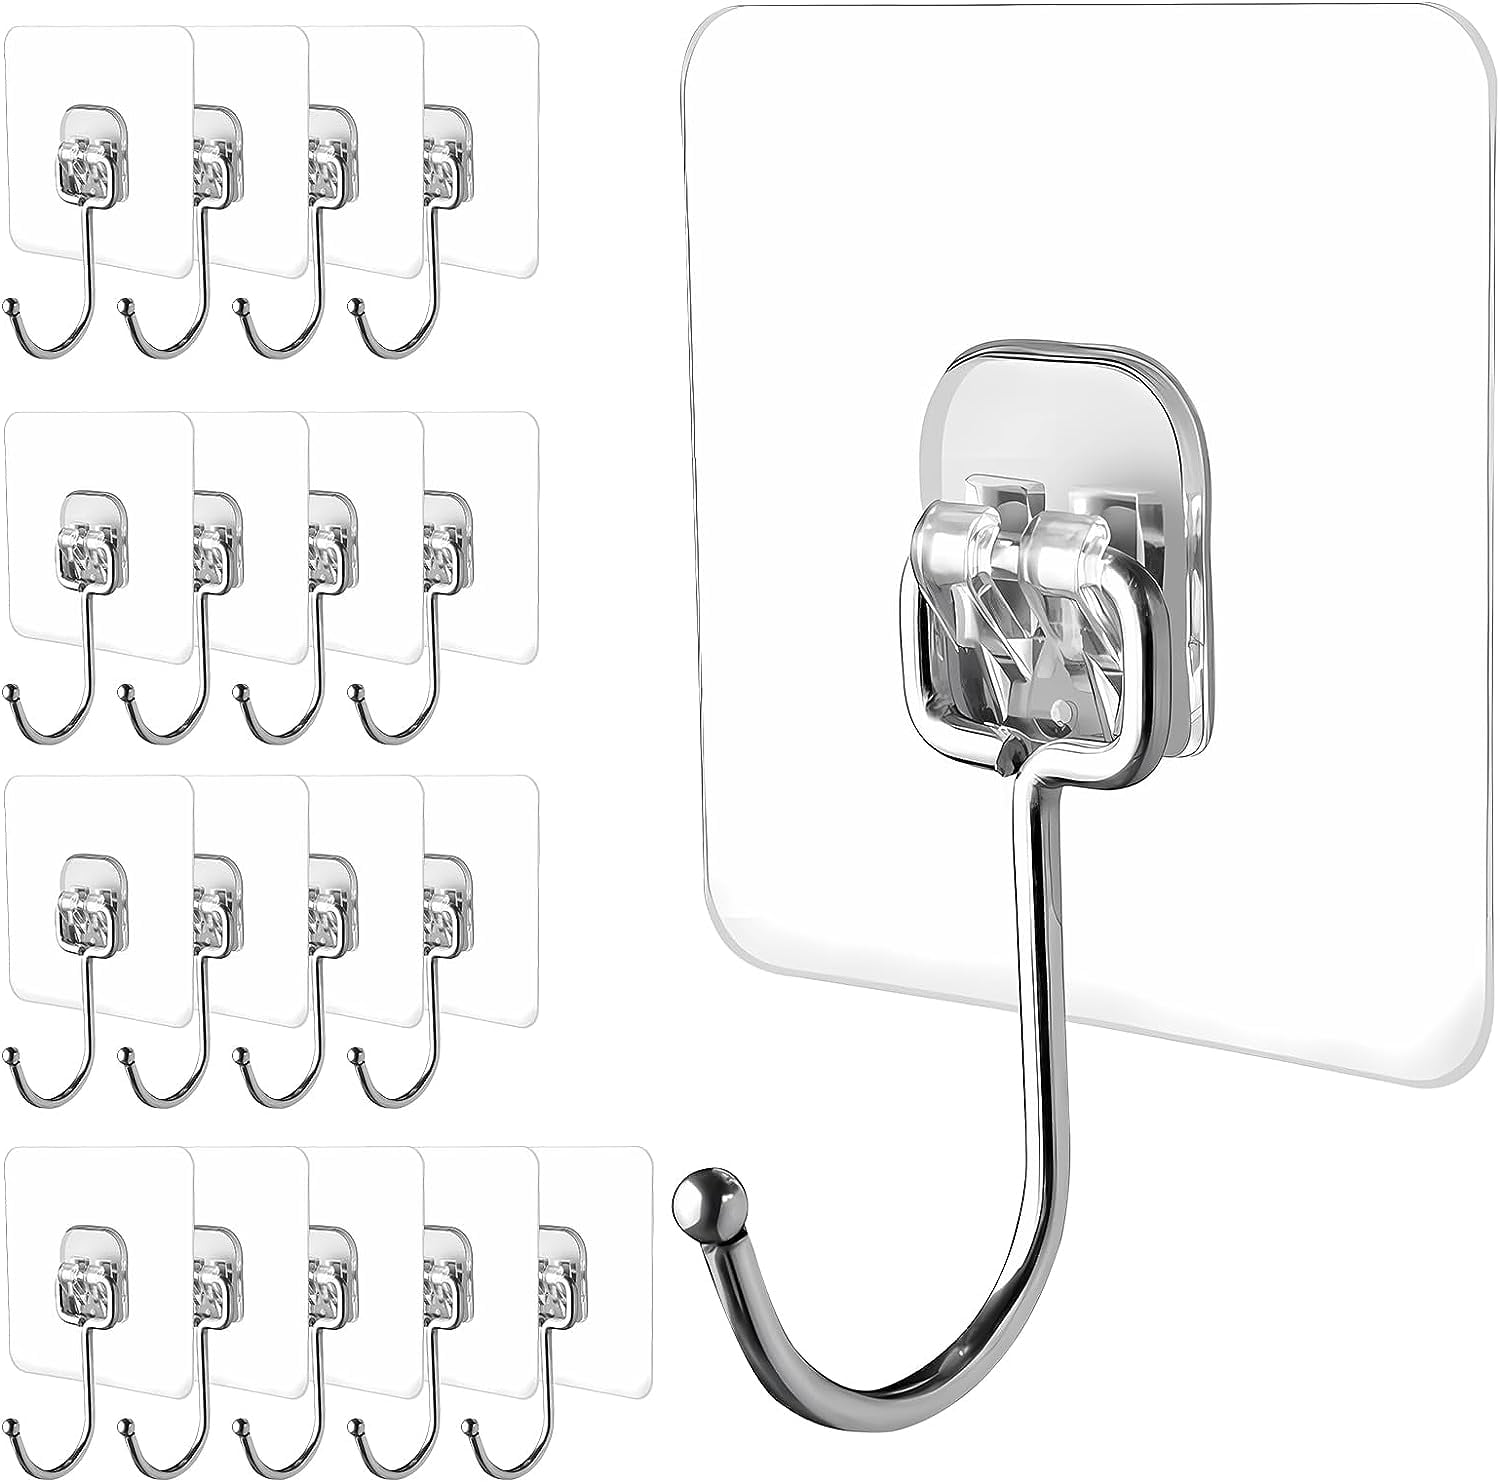 DADHOT Large Adhesive Hooks, 18-Pack Hold 44lb(Max) Heavy Duty